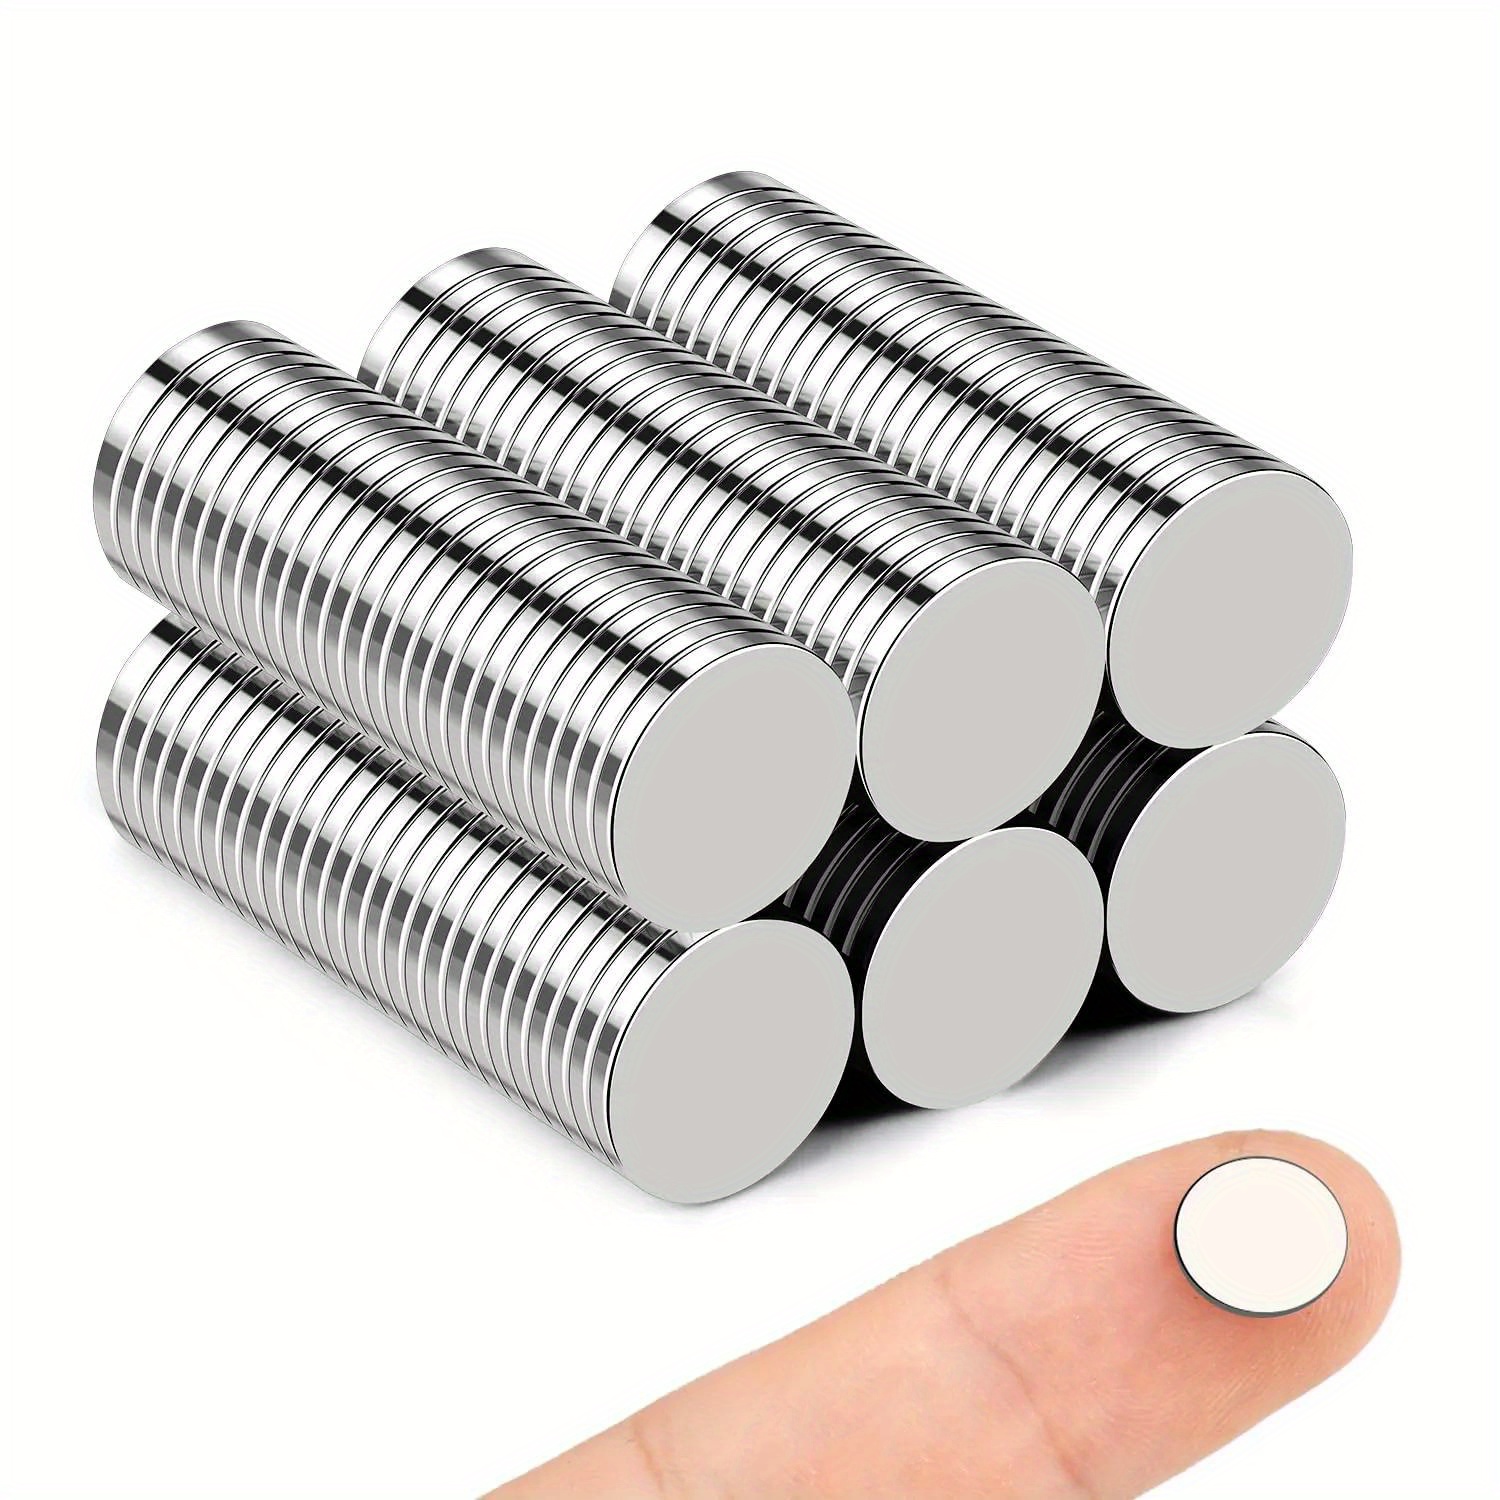 

10x1mm Disc Magnets, Rare Craftsmagnets Sheet Perfect For Tool & Workplace Organization!